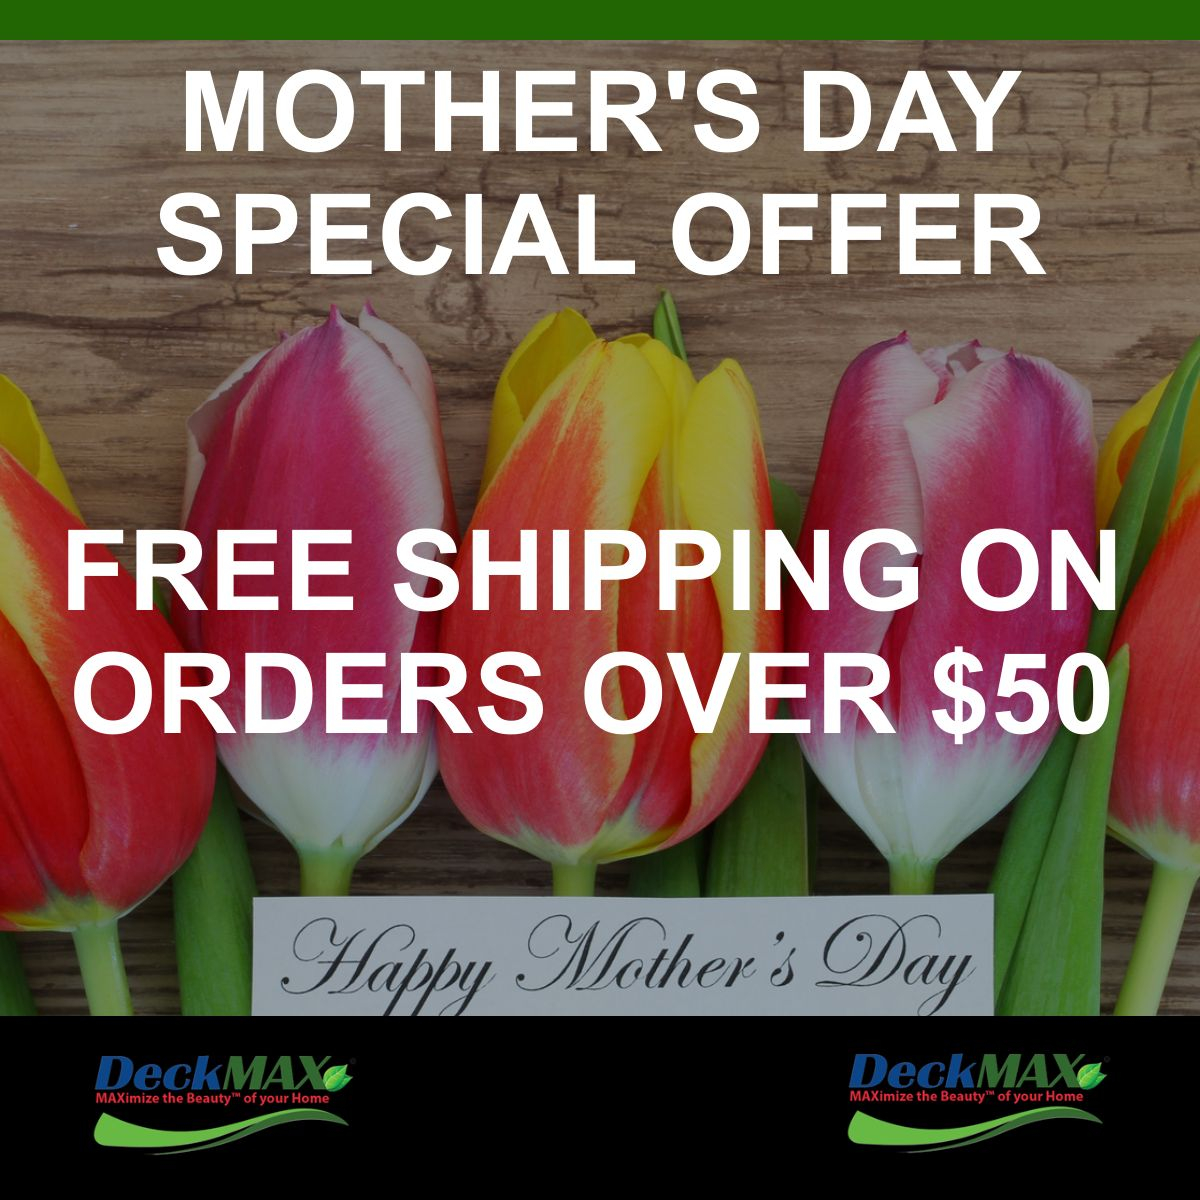 MOTHERS DAY DECKMAX Special